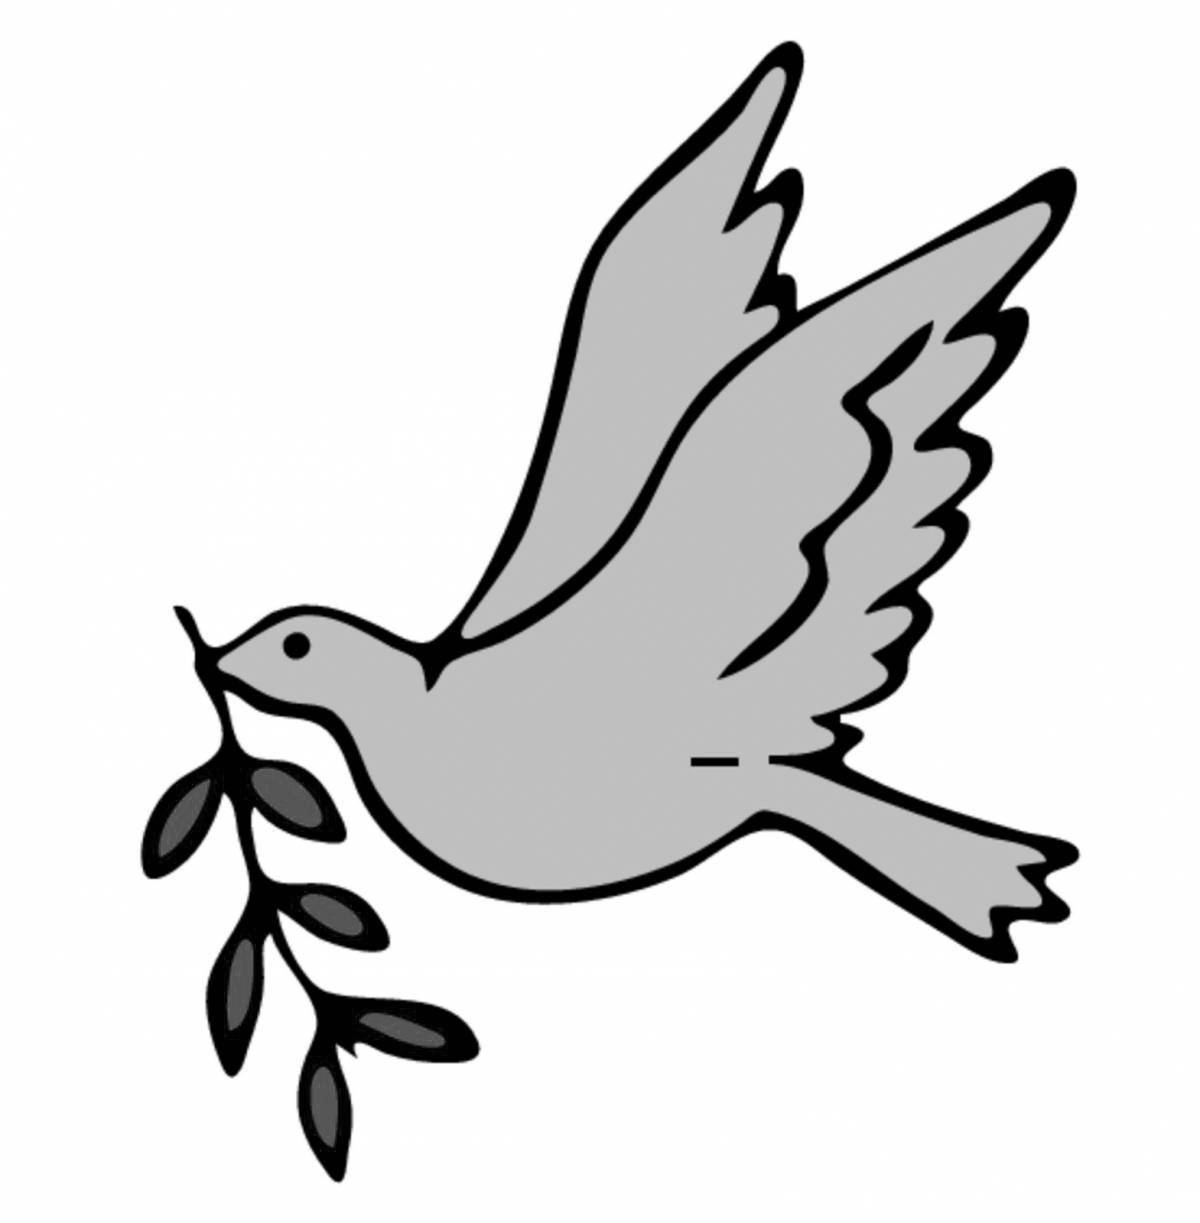 Glorious peace dove coloring page for kids